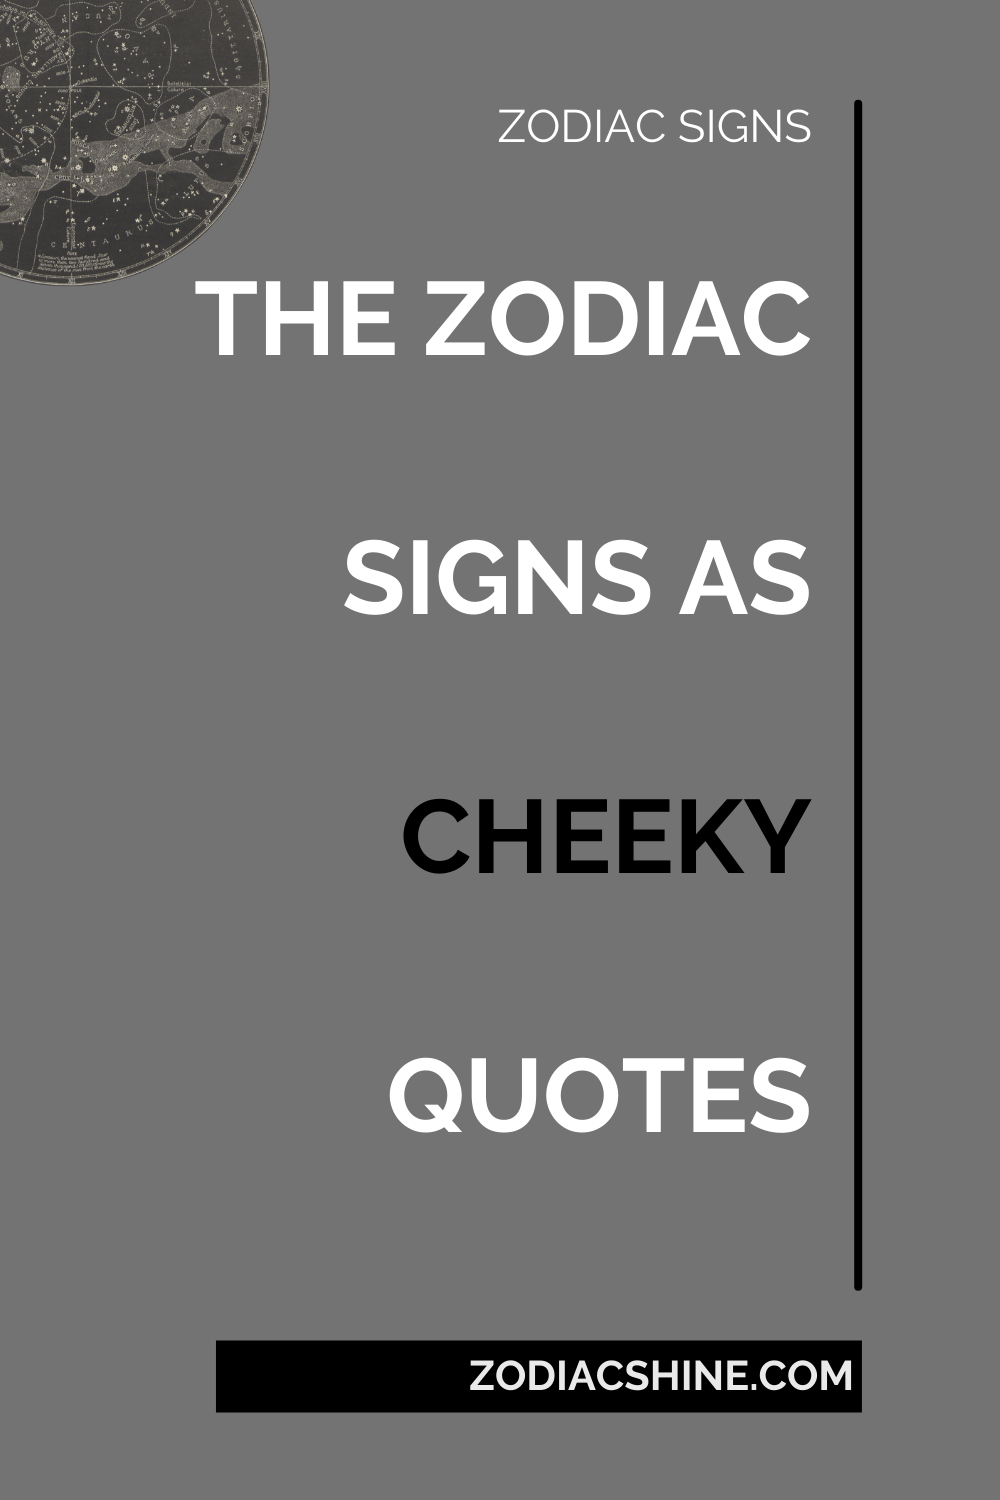 The zodiac signs as cheeky quotes